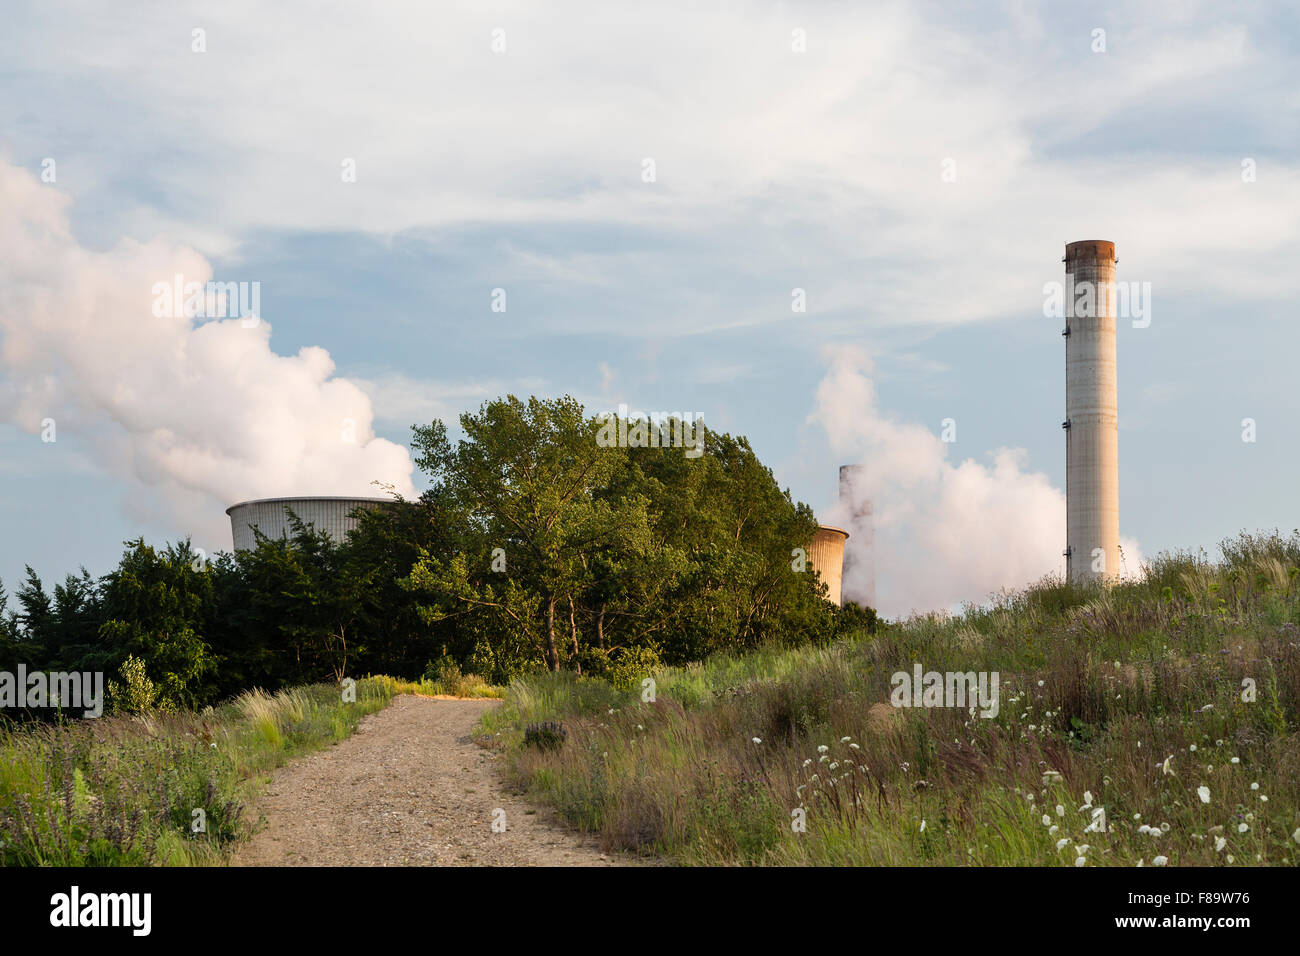 A large coal-fired power plant behind a hill with a dirt road leading towards it. Stock Photo